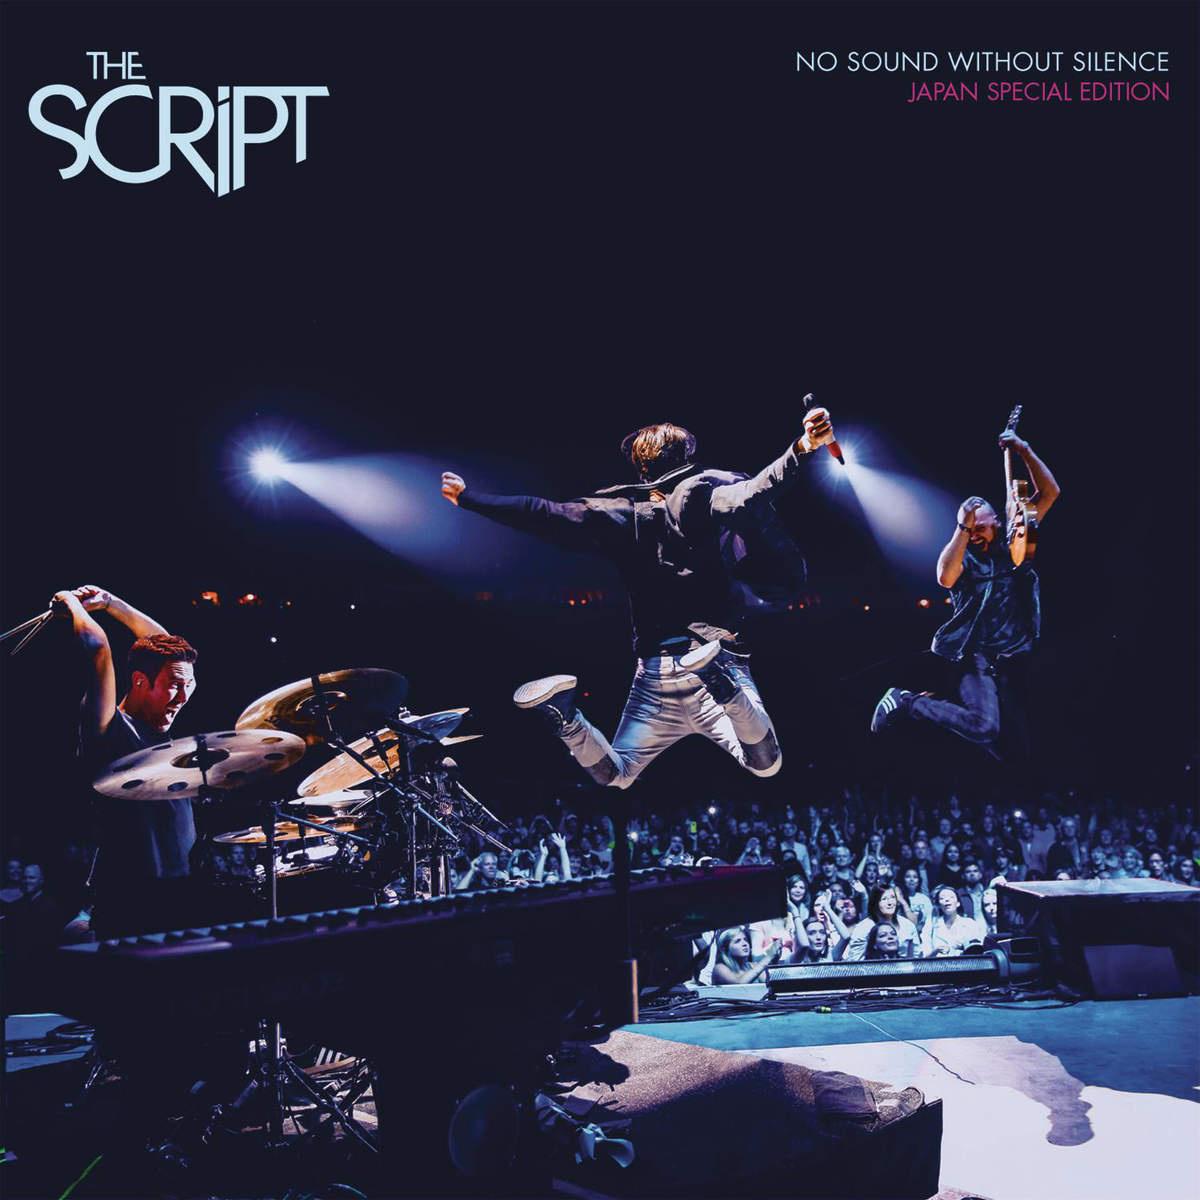 Hall of Fame (Live in Tokyo)歌词 歌手The Script-专辑No Sound Without Silence (Japan Special Edition)-单曲《Hall of Fame (Live in Tokyo)》LRC歌词下载